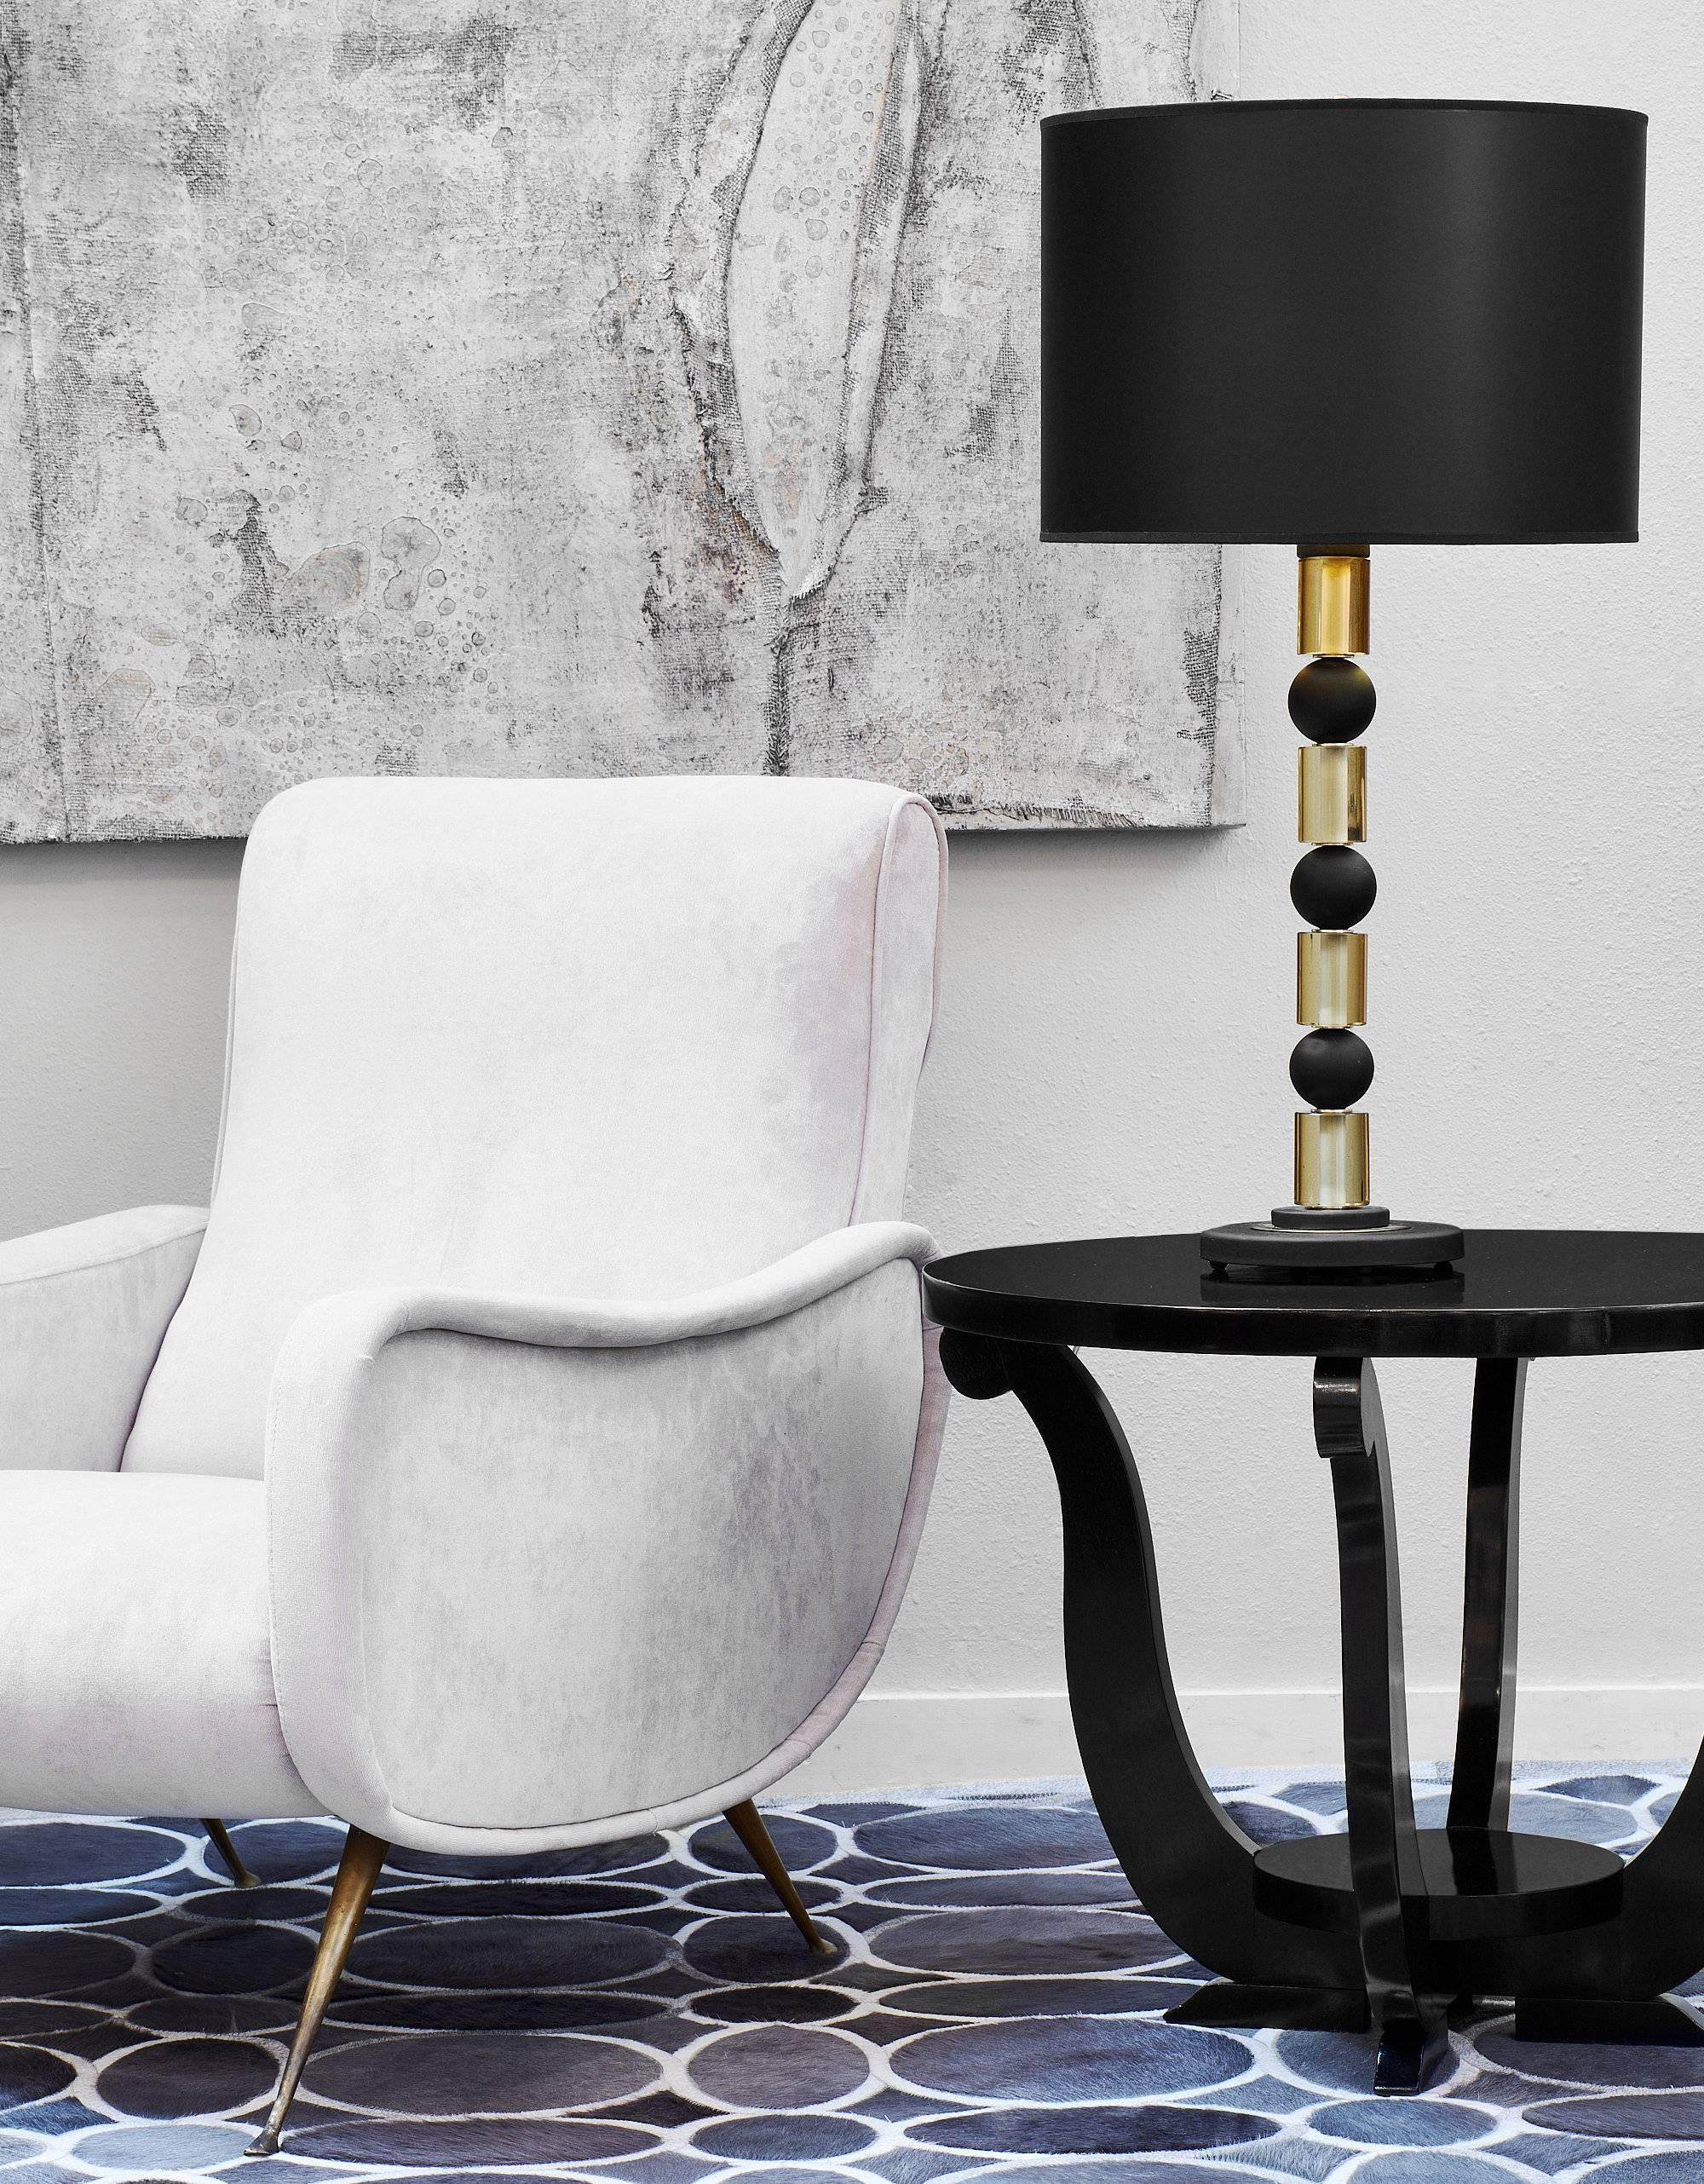 These sleek and modern Murano glass table lamps have alternating solid black spheres with amber gold glass cylinders. The beautiful pair have thick round glass bases and show a very high quality of craftsmanship. The geometric shapes are dynamic and